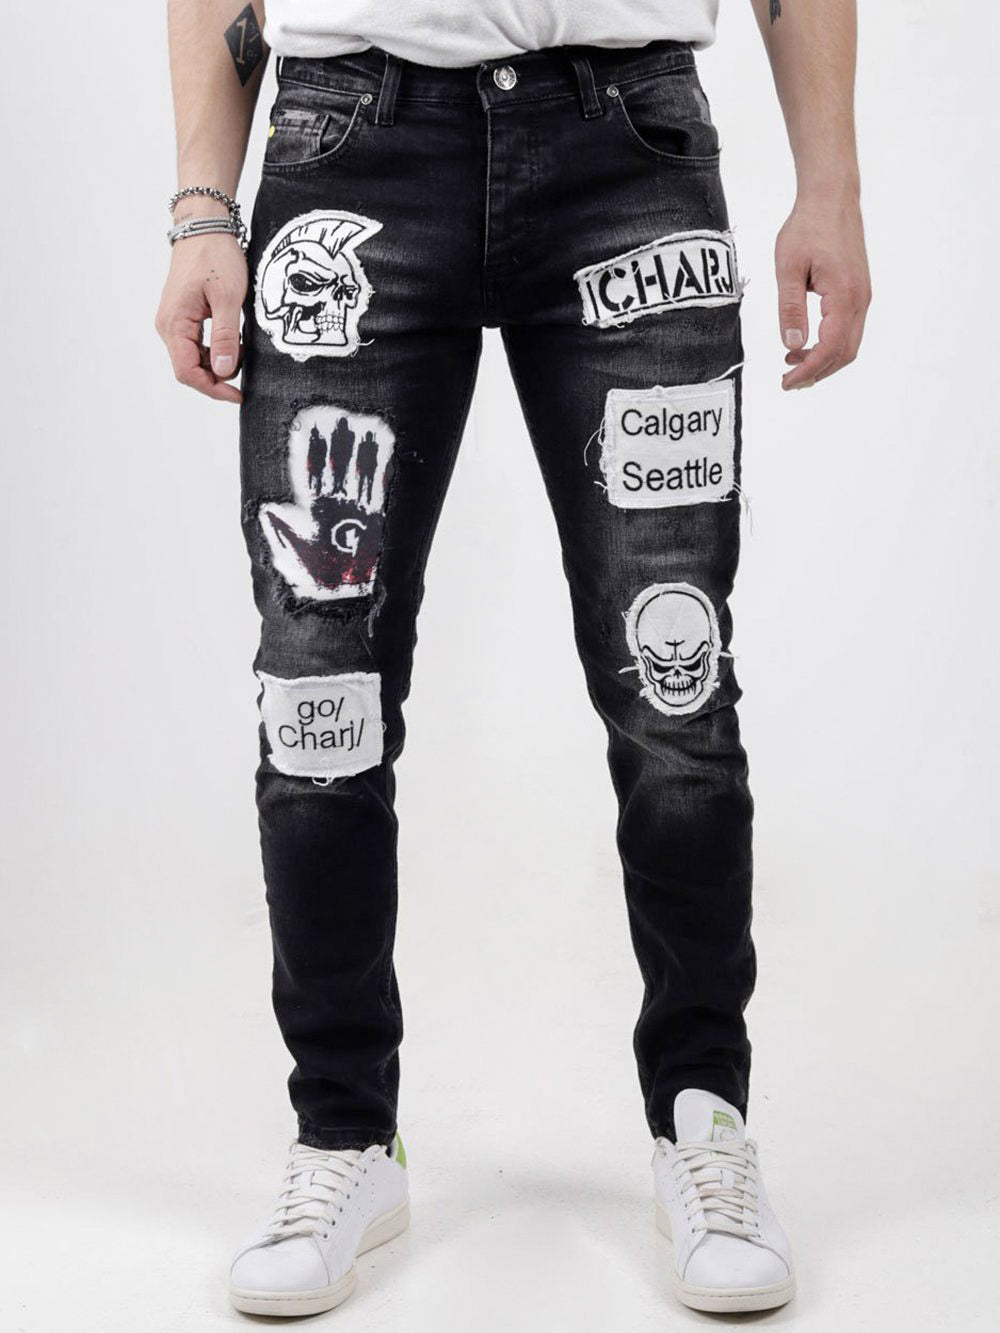 A man wearing a pair of Black Headstone jeans with patches on them.